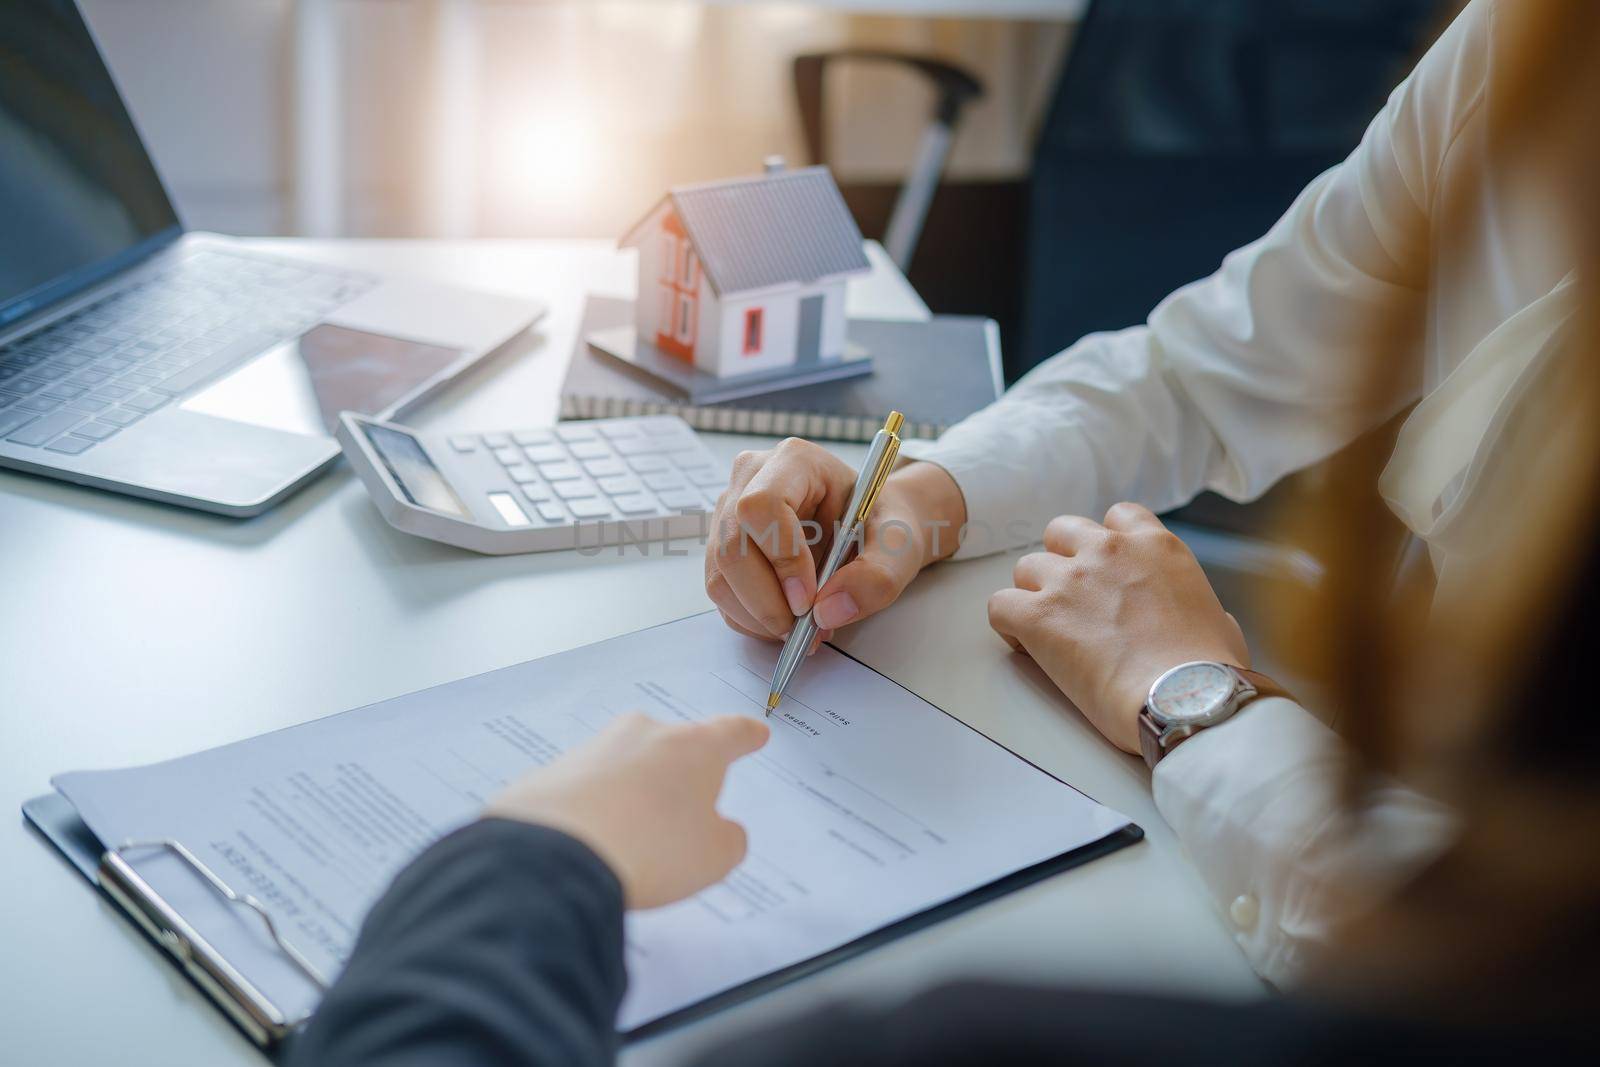 Guarantee, mortgage, agreement, contract, sign, the customer is signing the contract document as evidence to the real estate agent or bank officer according to the agreement according to the document.